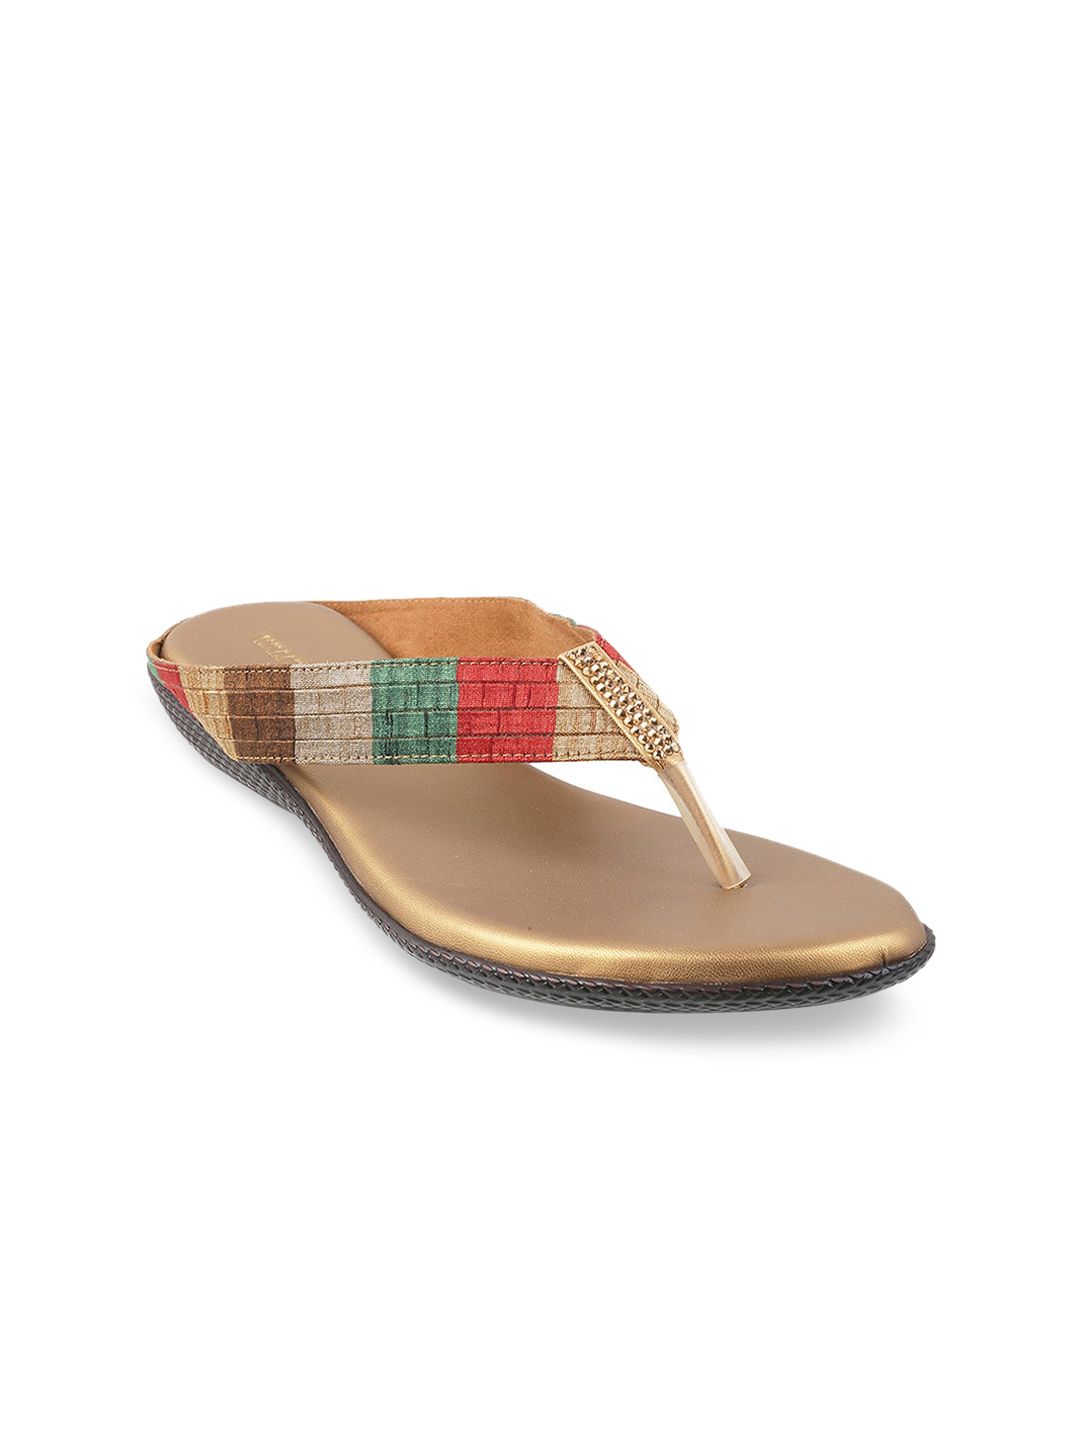 WALKWAY by Metro Women Gold-Toned Embellished Flats Price in India